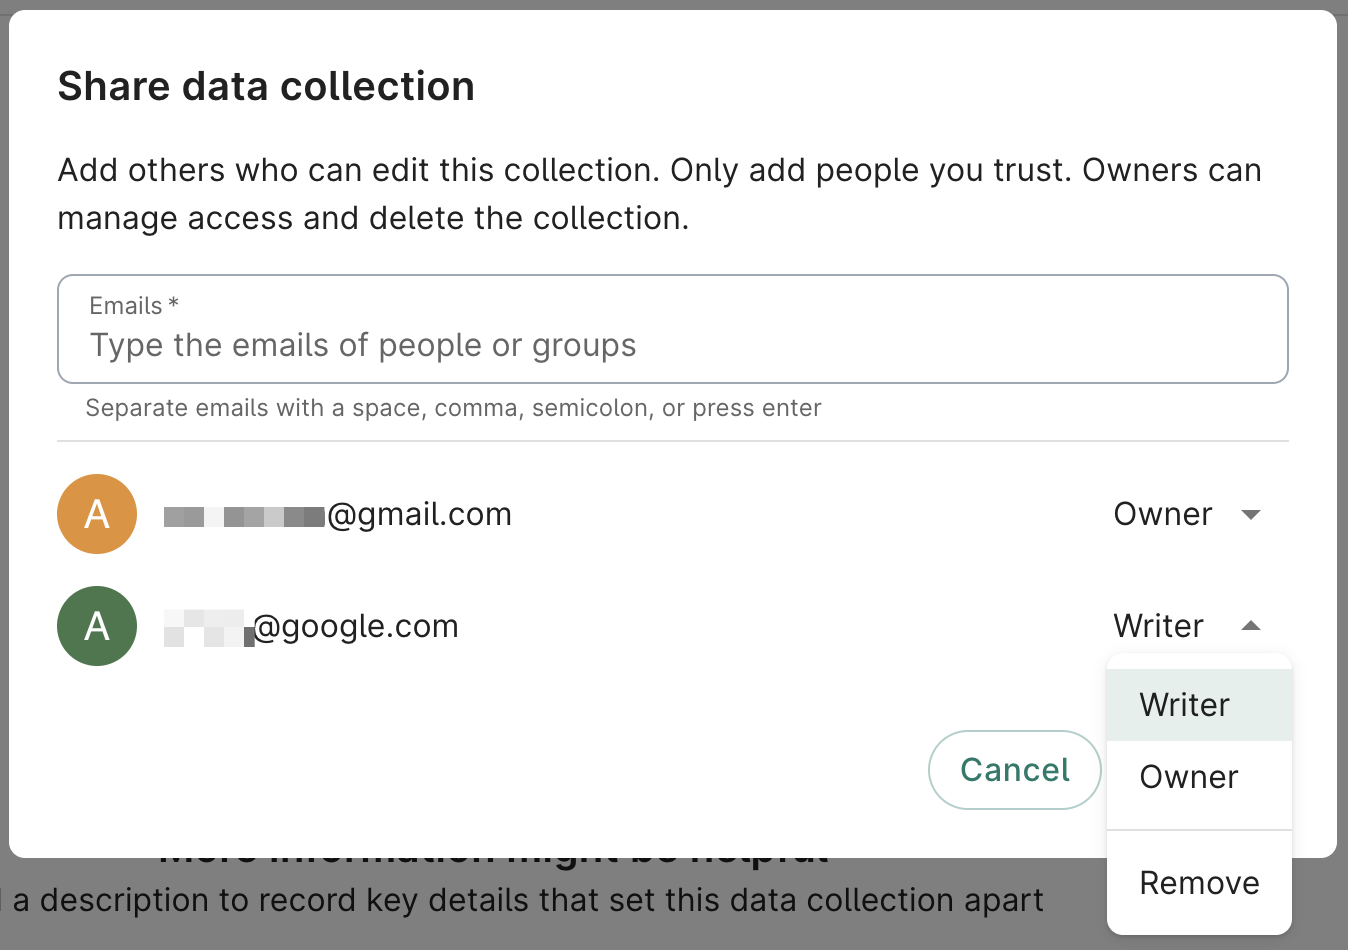 Screenshot of the Share data collection dialog showing a list of users the data collection's been shared with, their access levels, and the dropdown to change the access level.